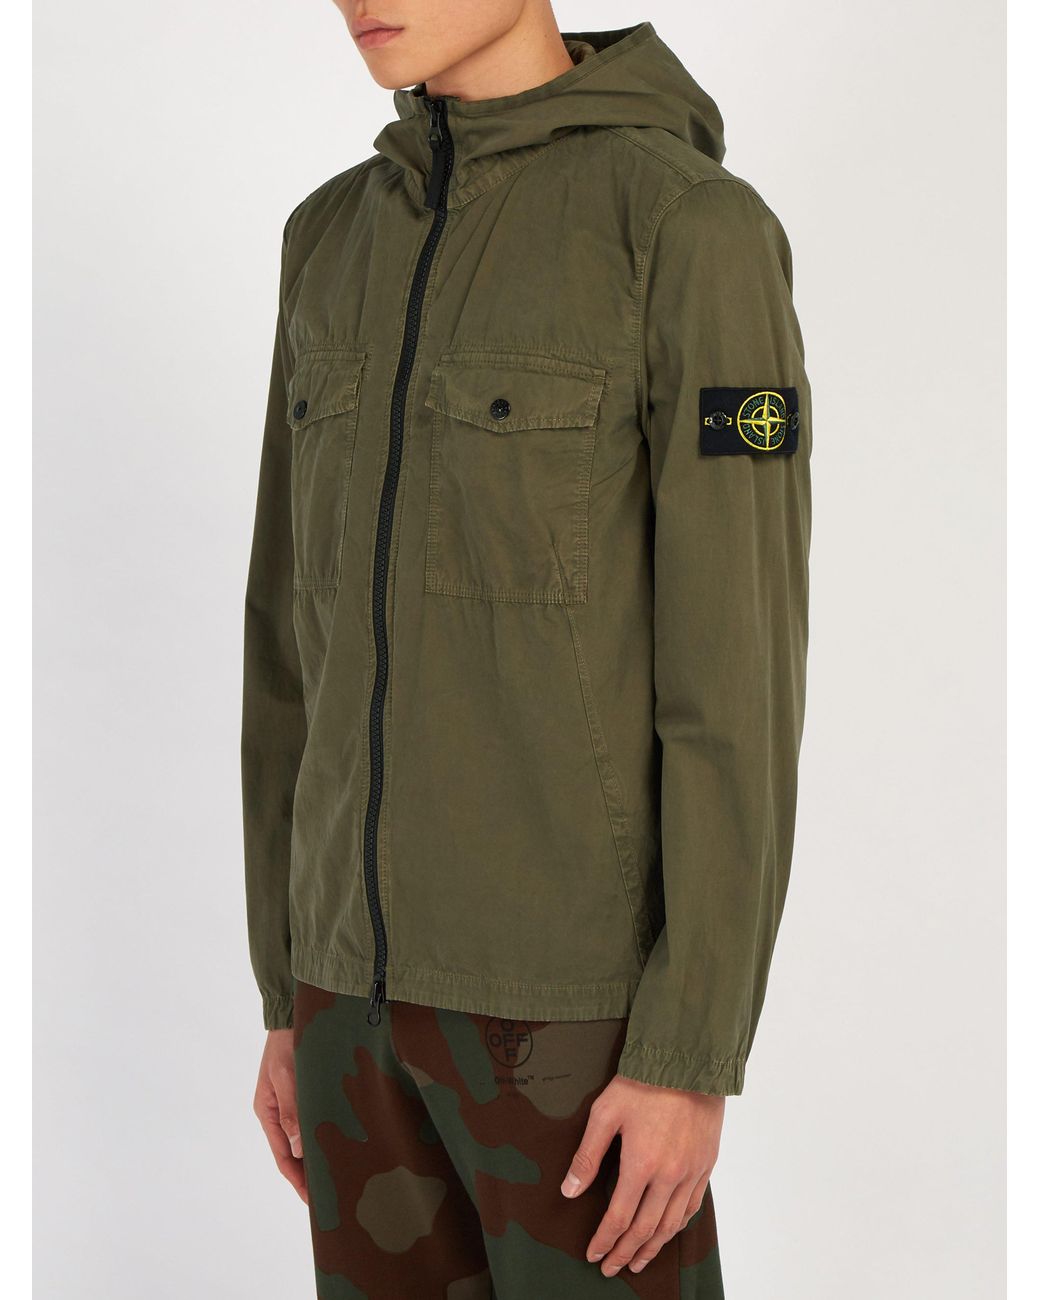 Stone Island Hooded Zip Through Cotton Overshirt in Green for Men | Lyst UK